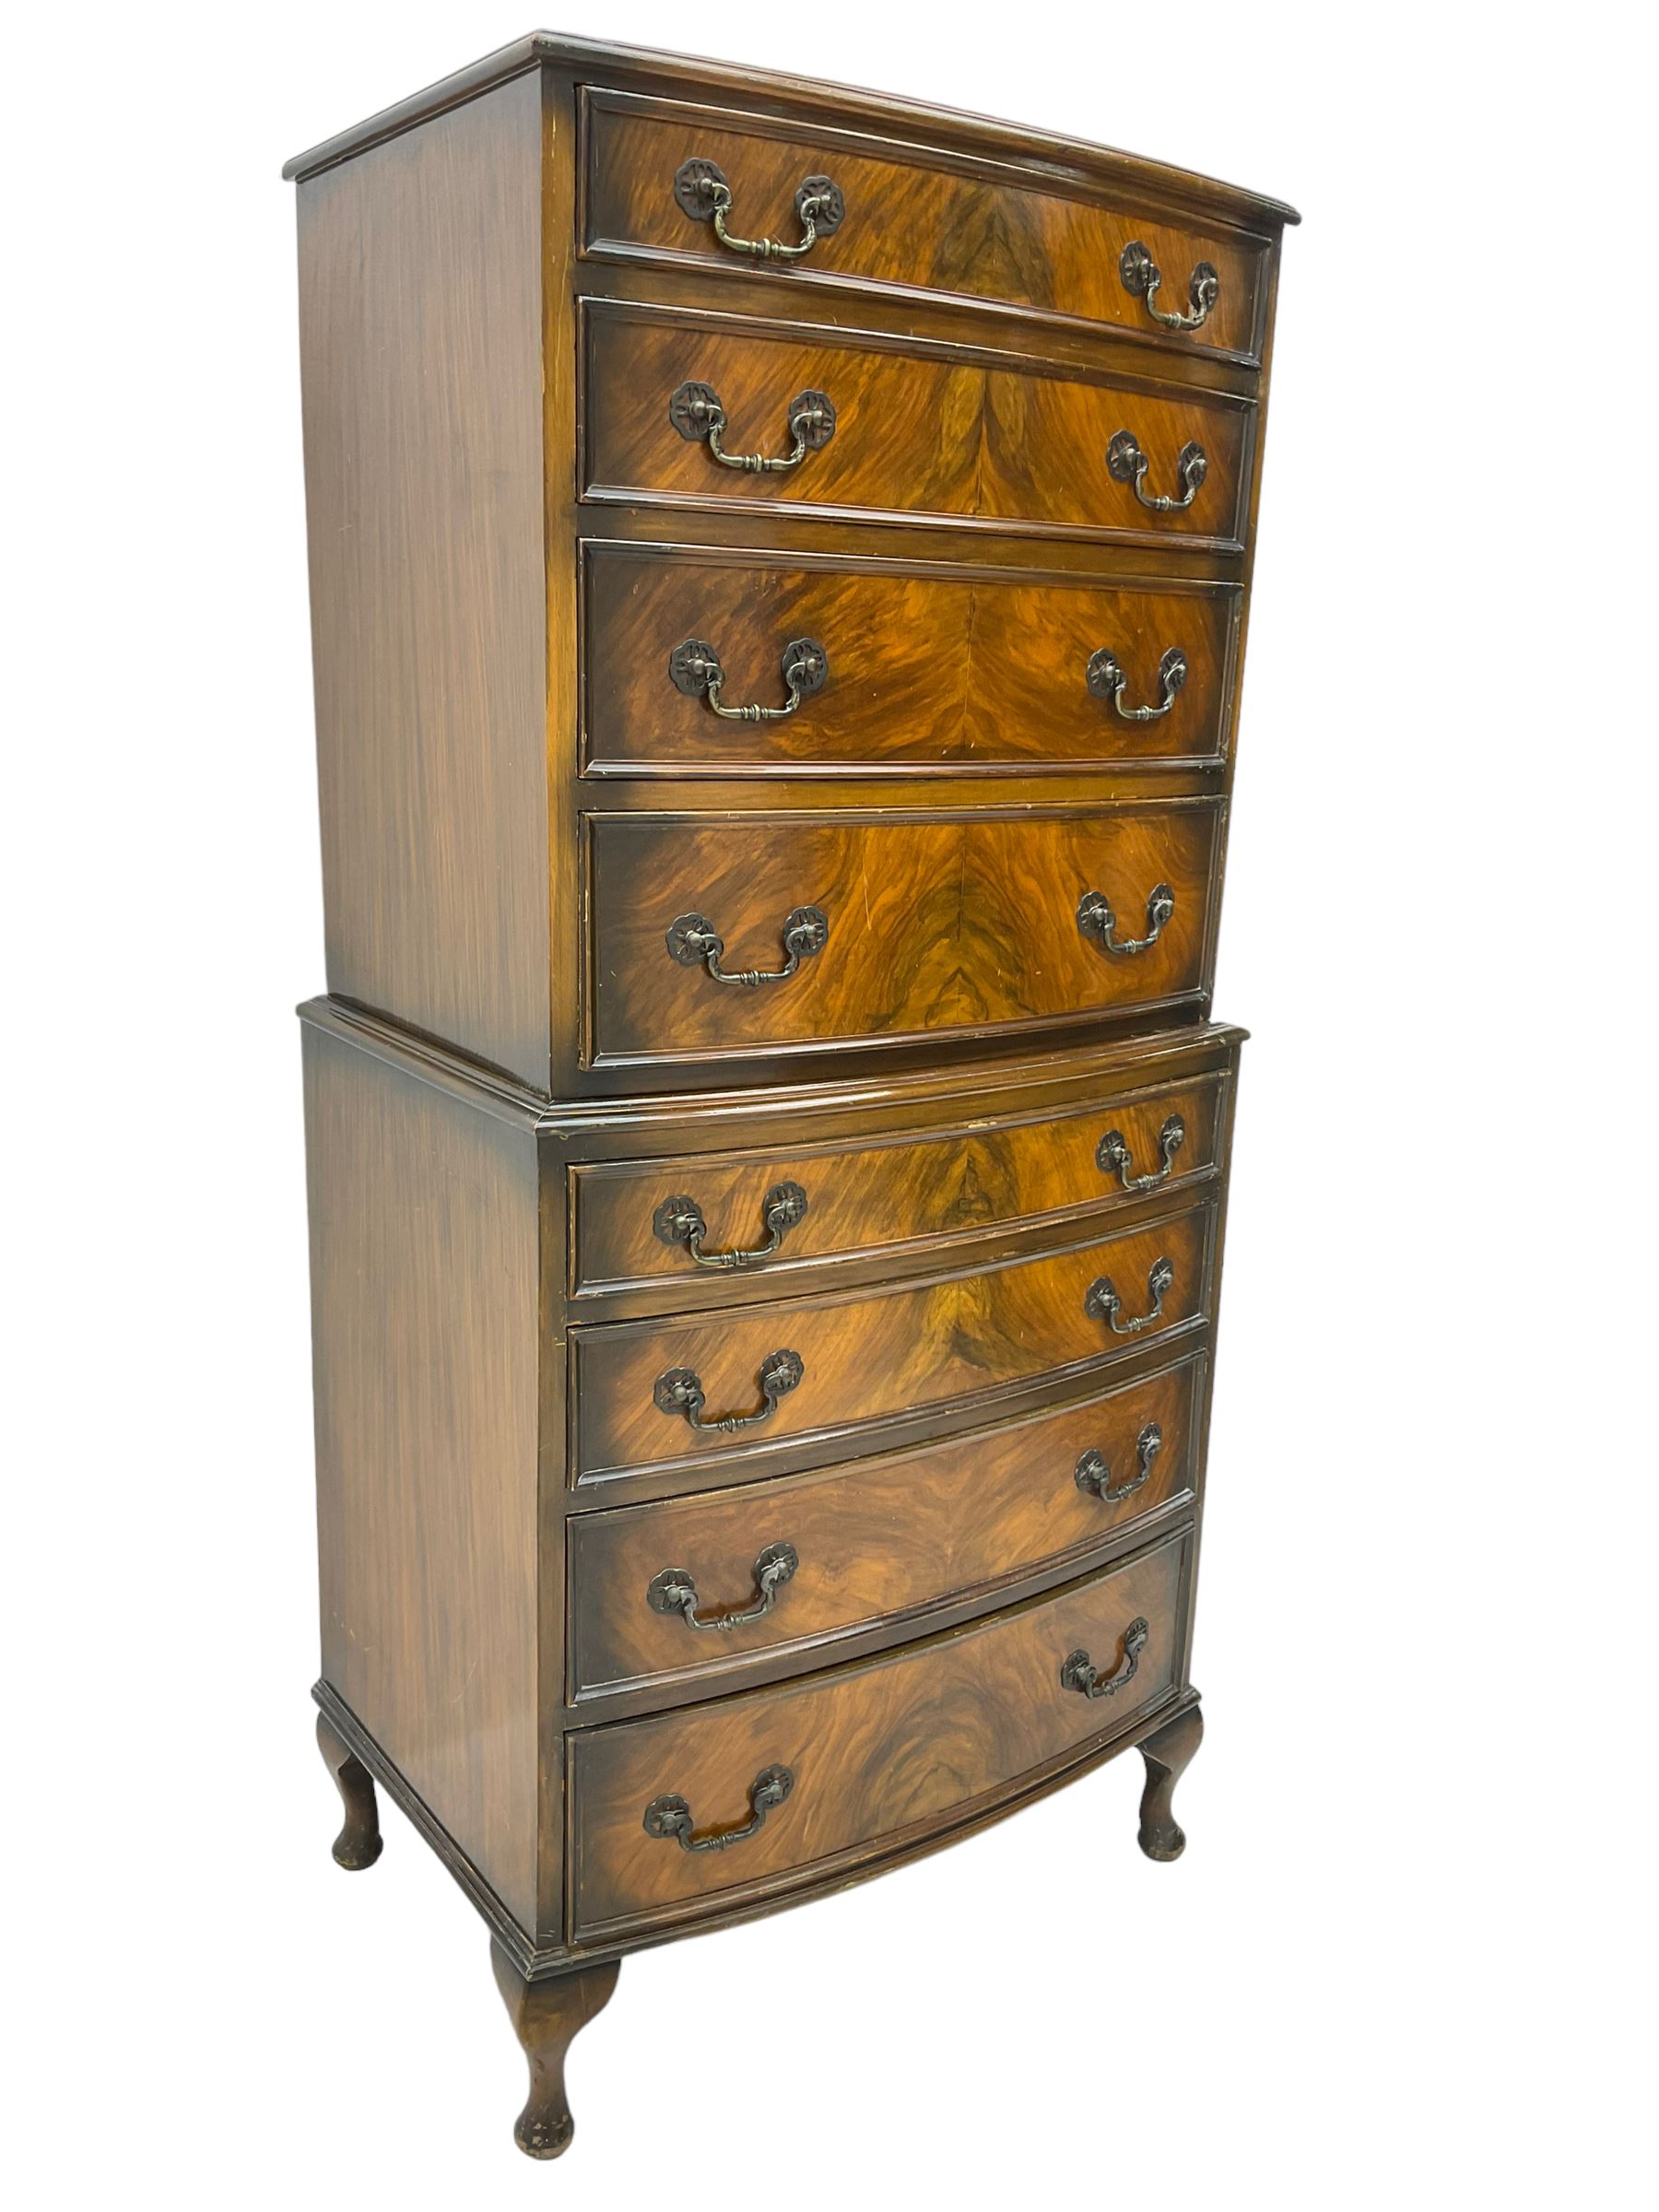 Mid-20th century walnut bow-front chest on chest - Image 3 of 7